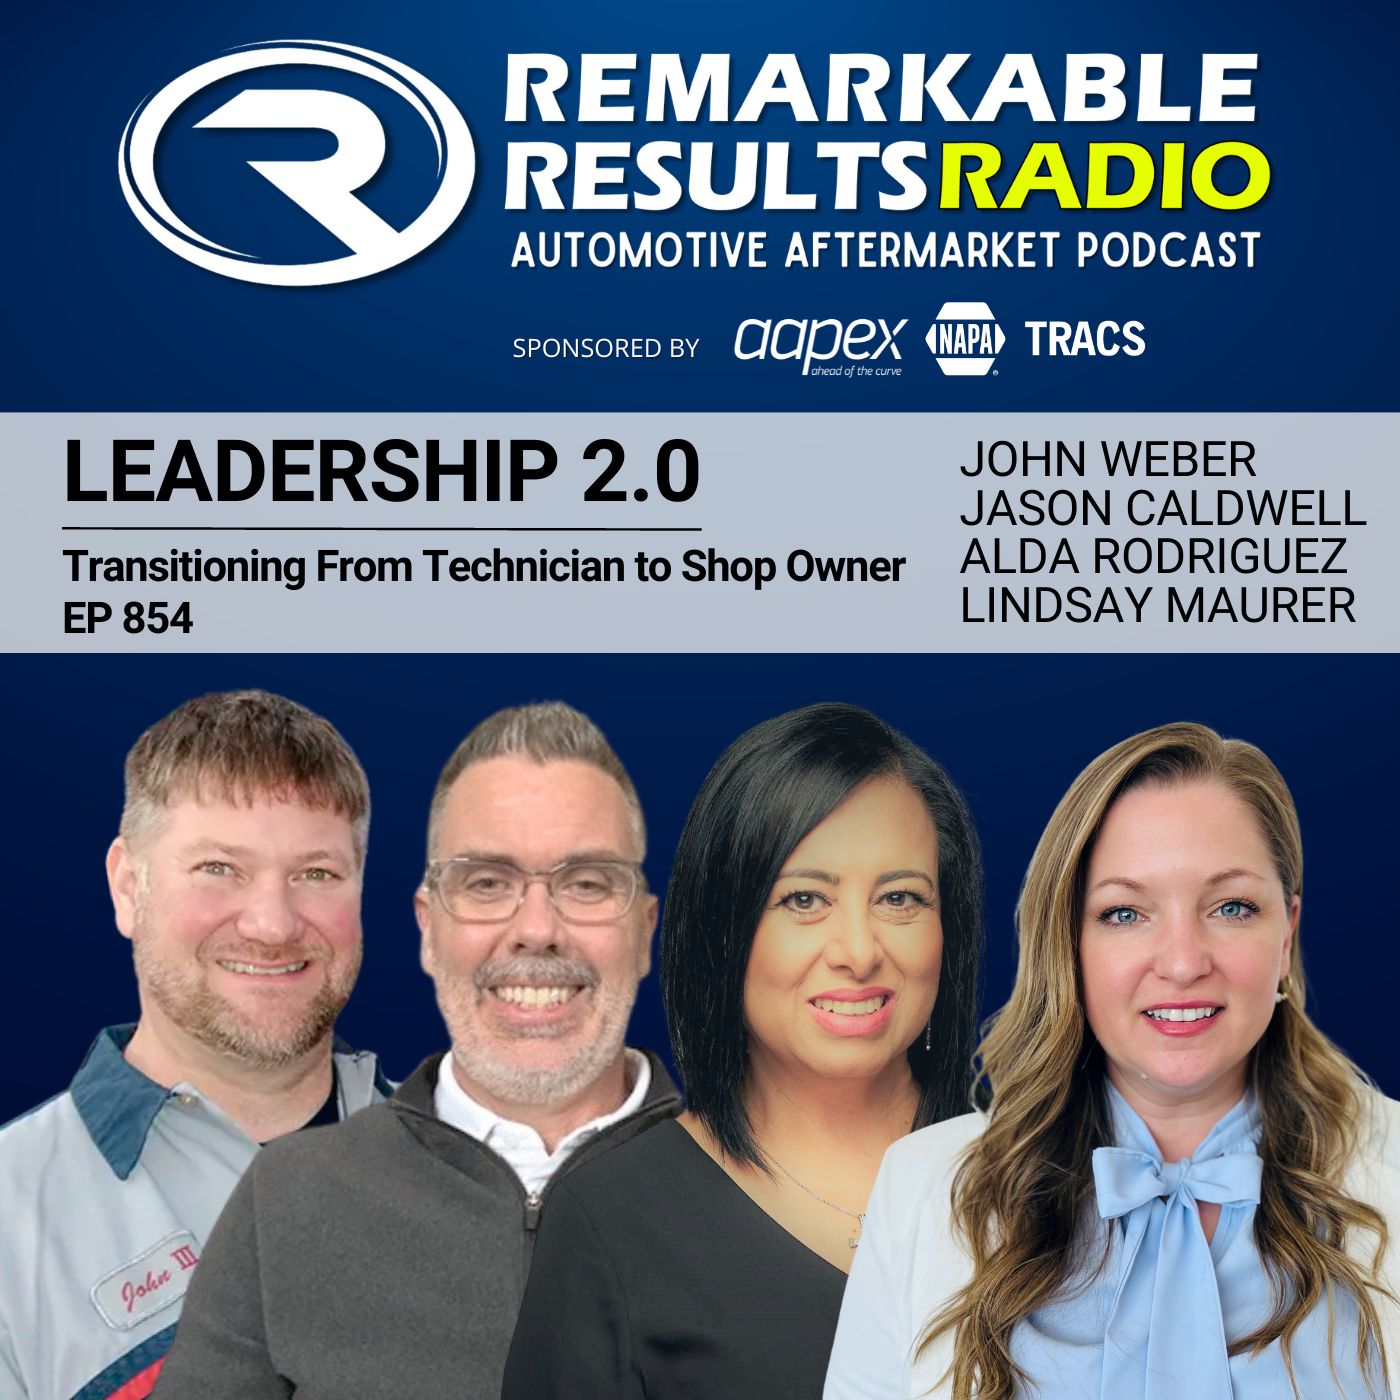 Artwork for podcast Remarkable Results Radio Podcast